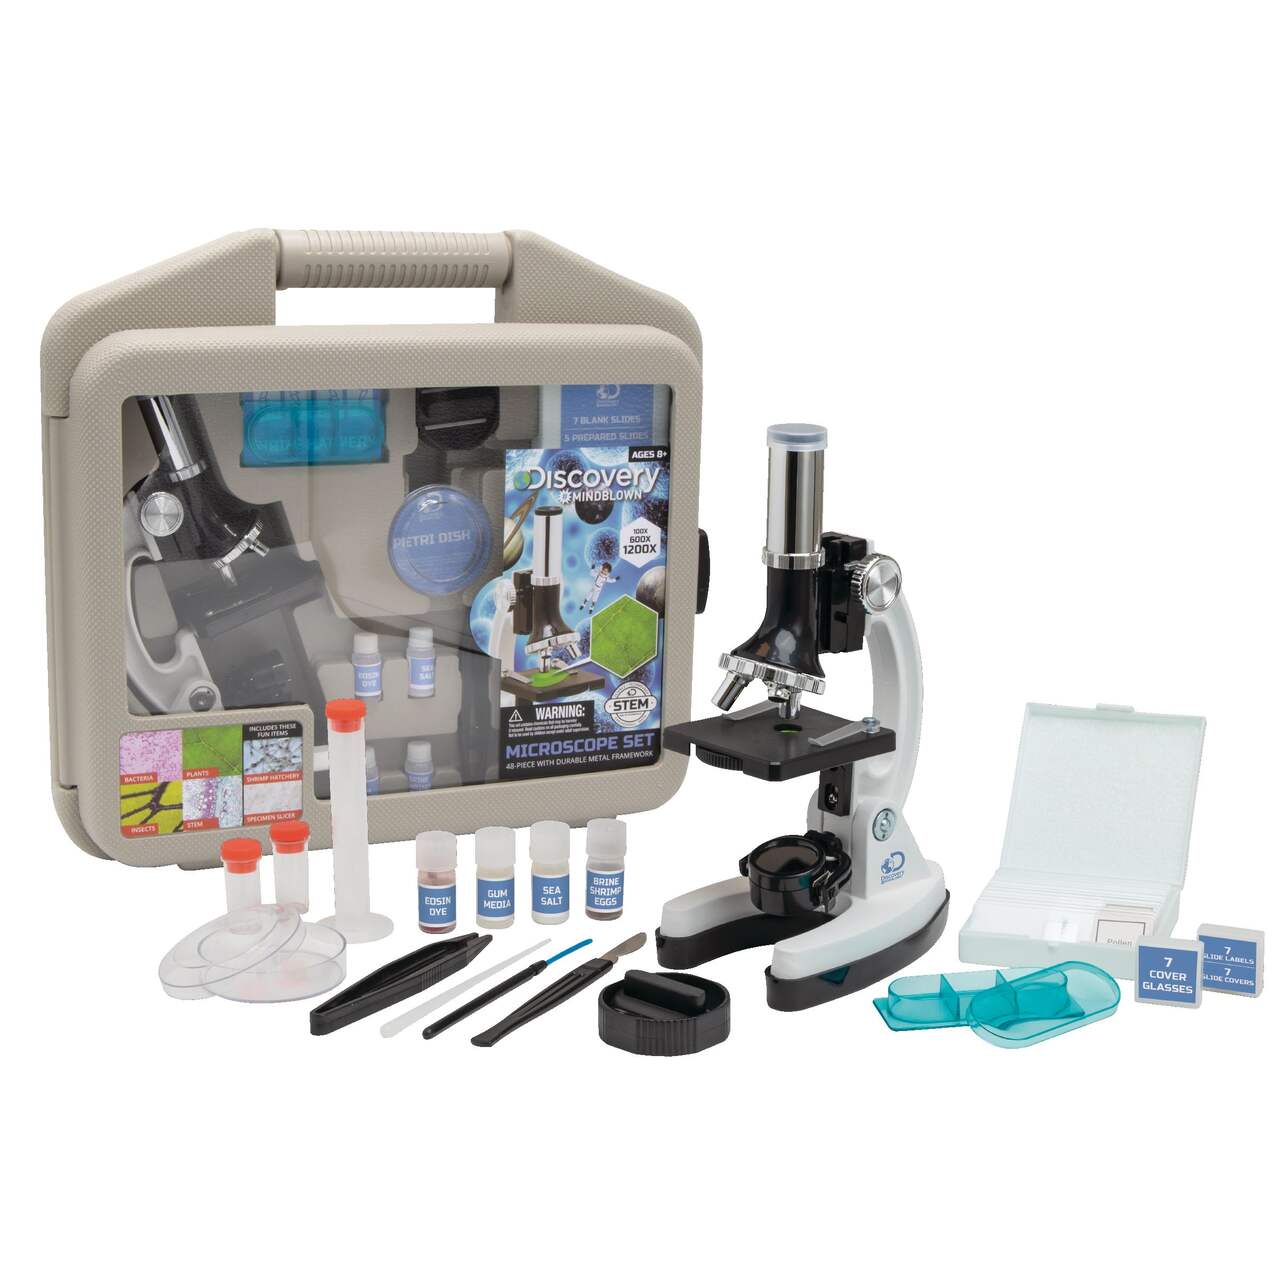 https://media-www.canadiantire.ca/product/seasonal-gardening/toys/toys-games/0509537/discovery-kids-microscope-set-48pc-6dd98add-d18c-4105-bf21-83f17bb841ab-jpgrendition.jpg?imdensity=1&imwidth=640&impolicy=mZoom